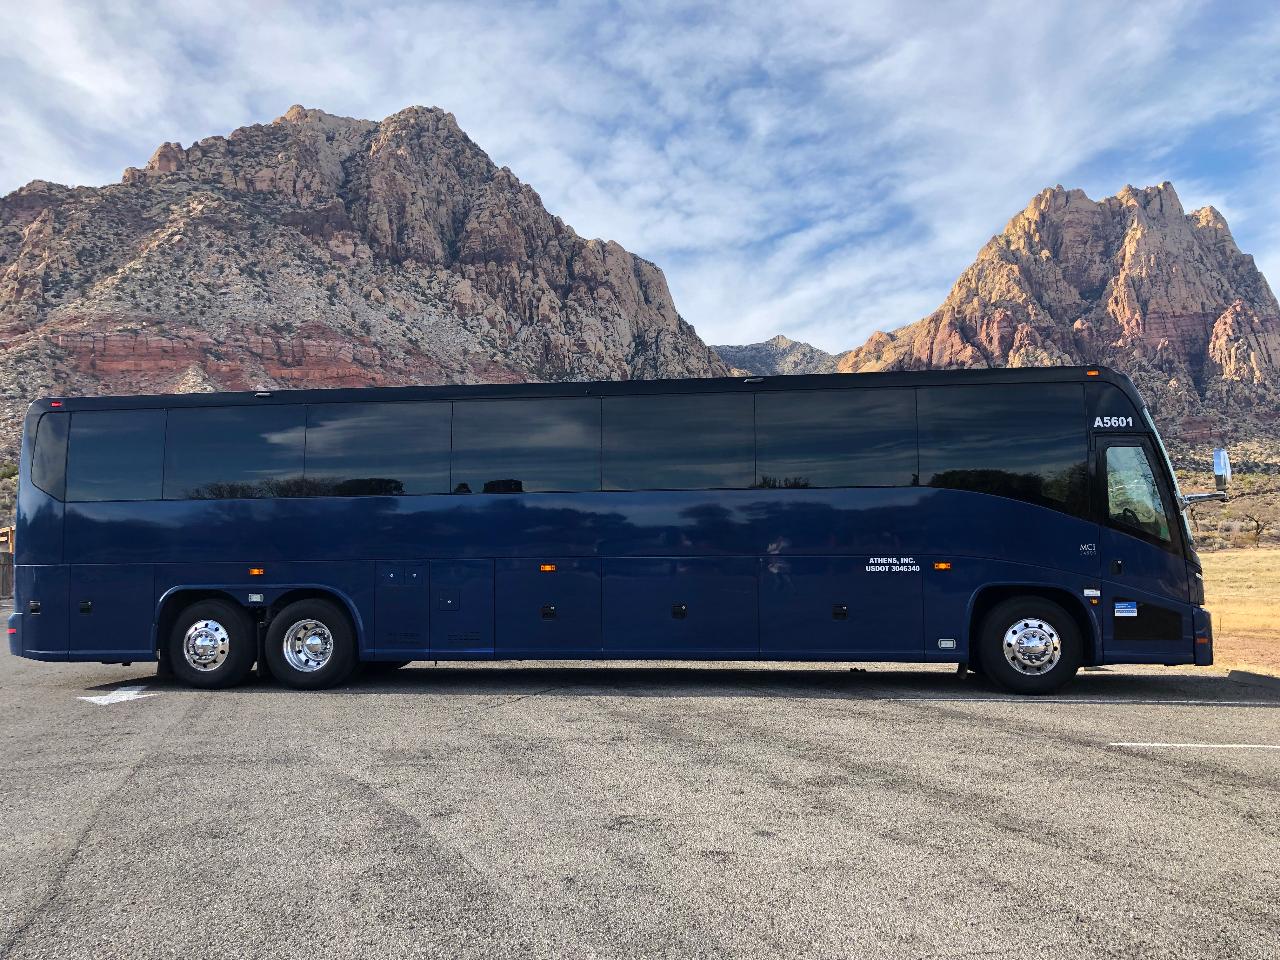 grand canyon tour by bus